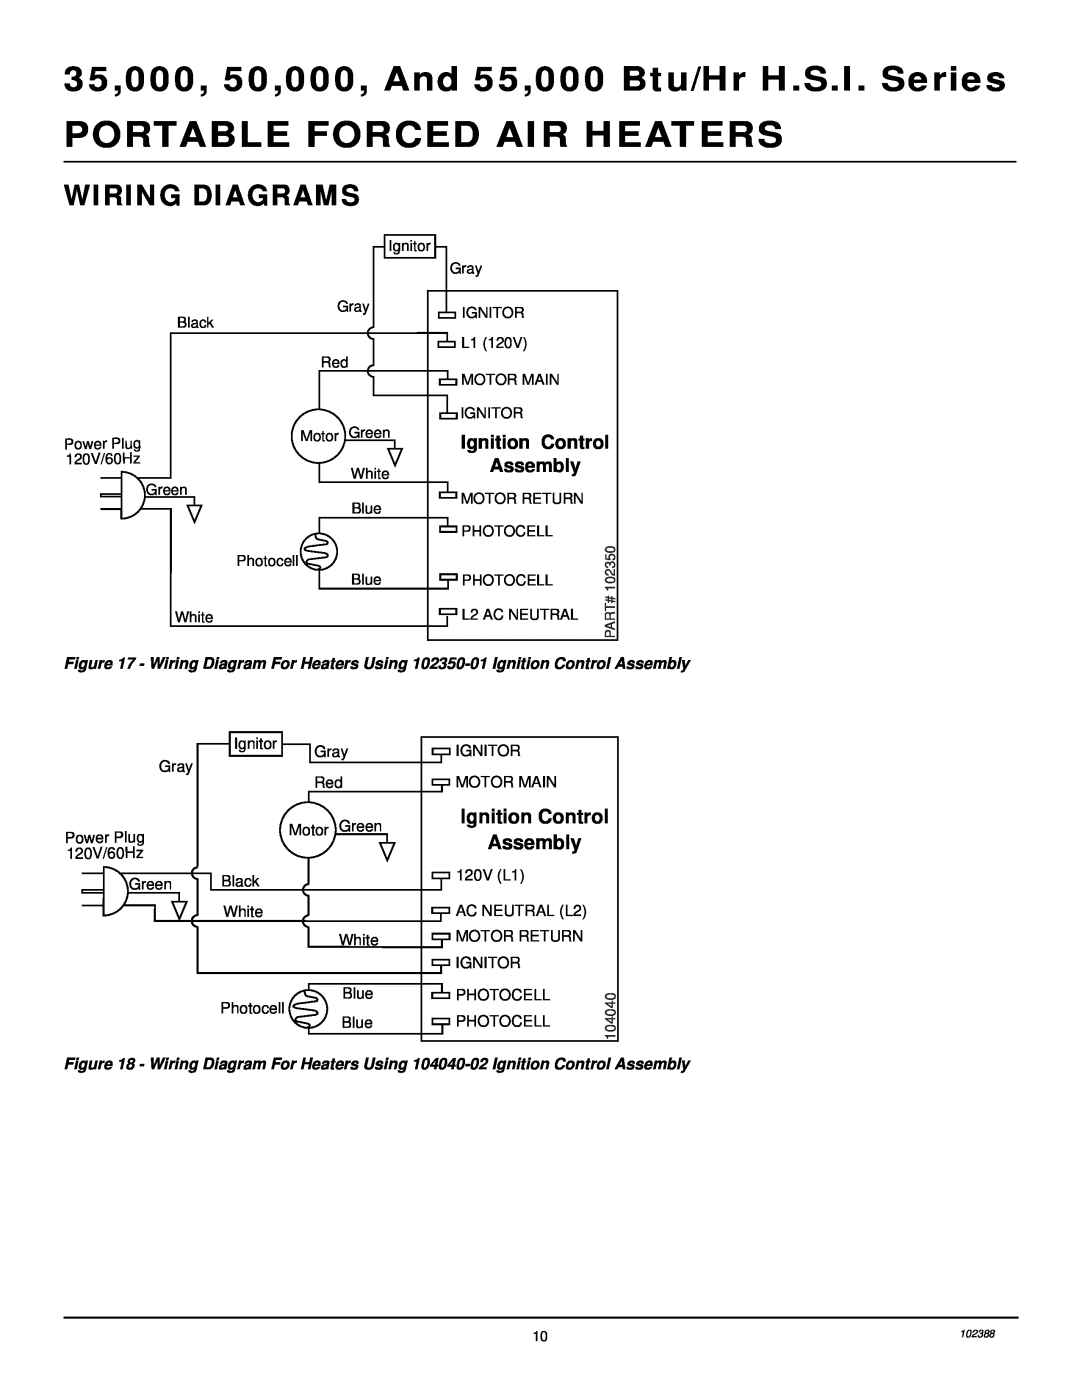 Desa and 55 owner manual Wiring Diagrams, Ignition Control Assembly, Portable Forced Air Heaters 